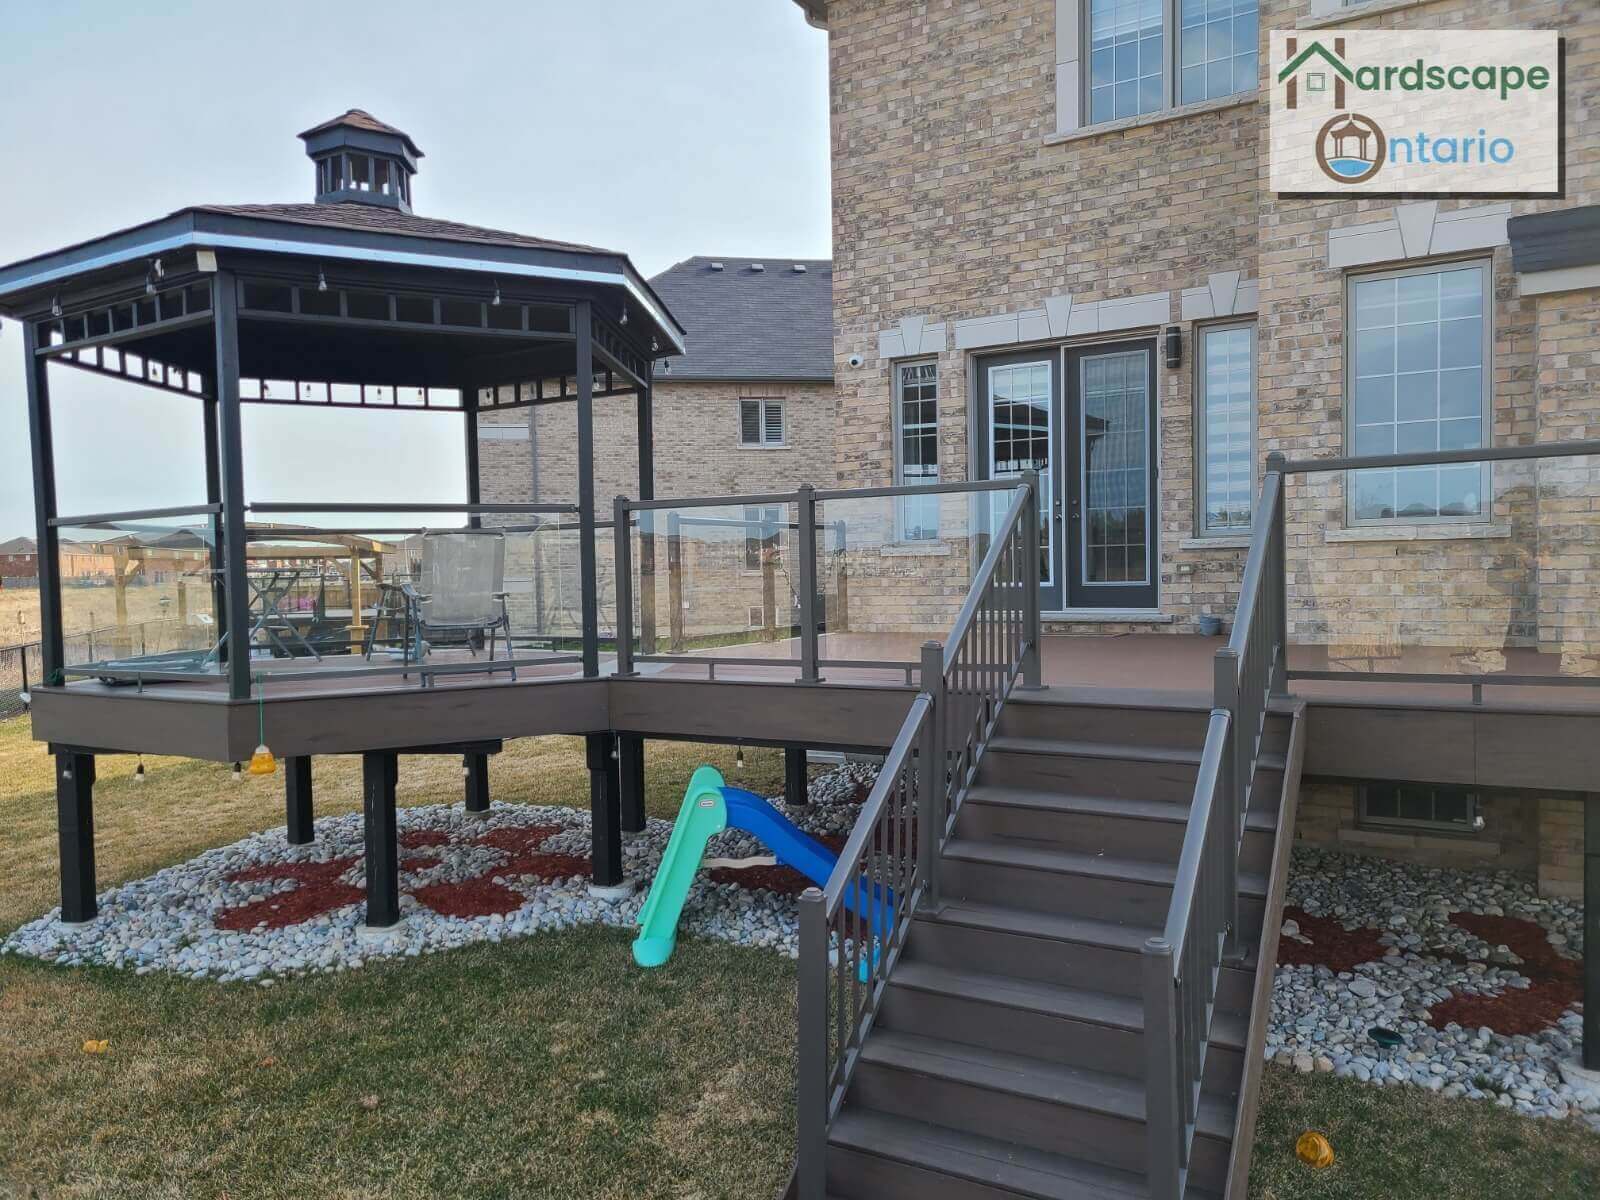 Hexagonal shaped gazebo with an incredible designed roof and tempered glass bars for protection also levelled wooden deck with tinted glass bar screens for protection with some wooden stairs. Under the deck is designed with river rock and brown mulch.